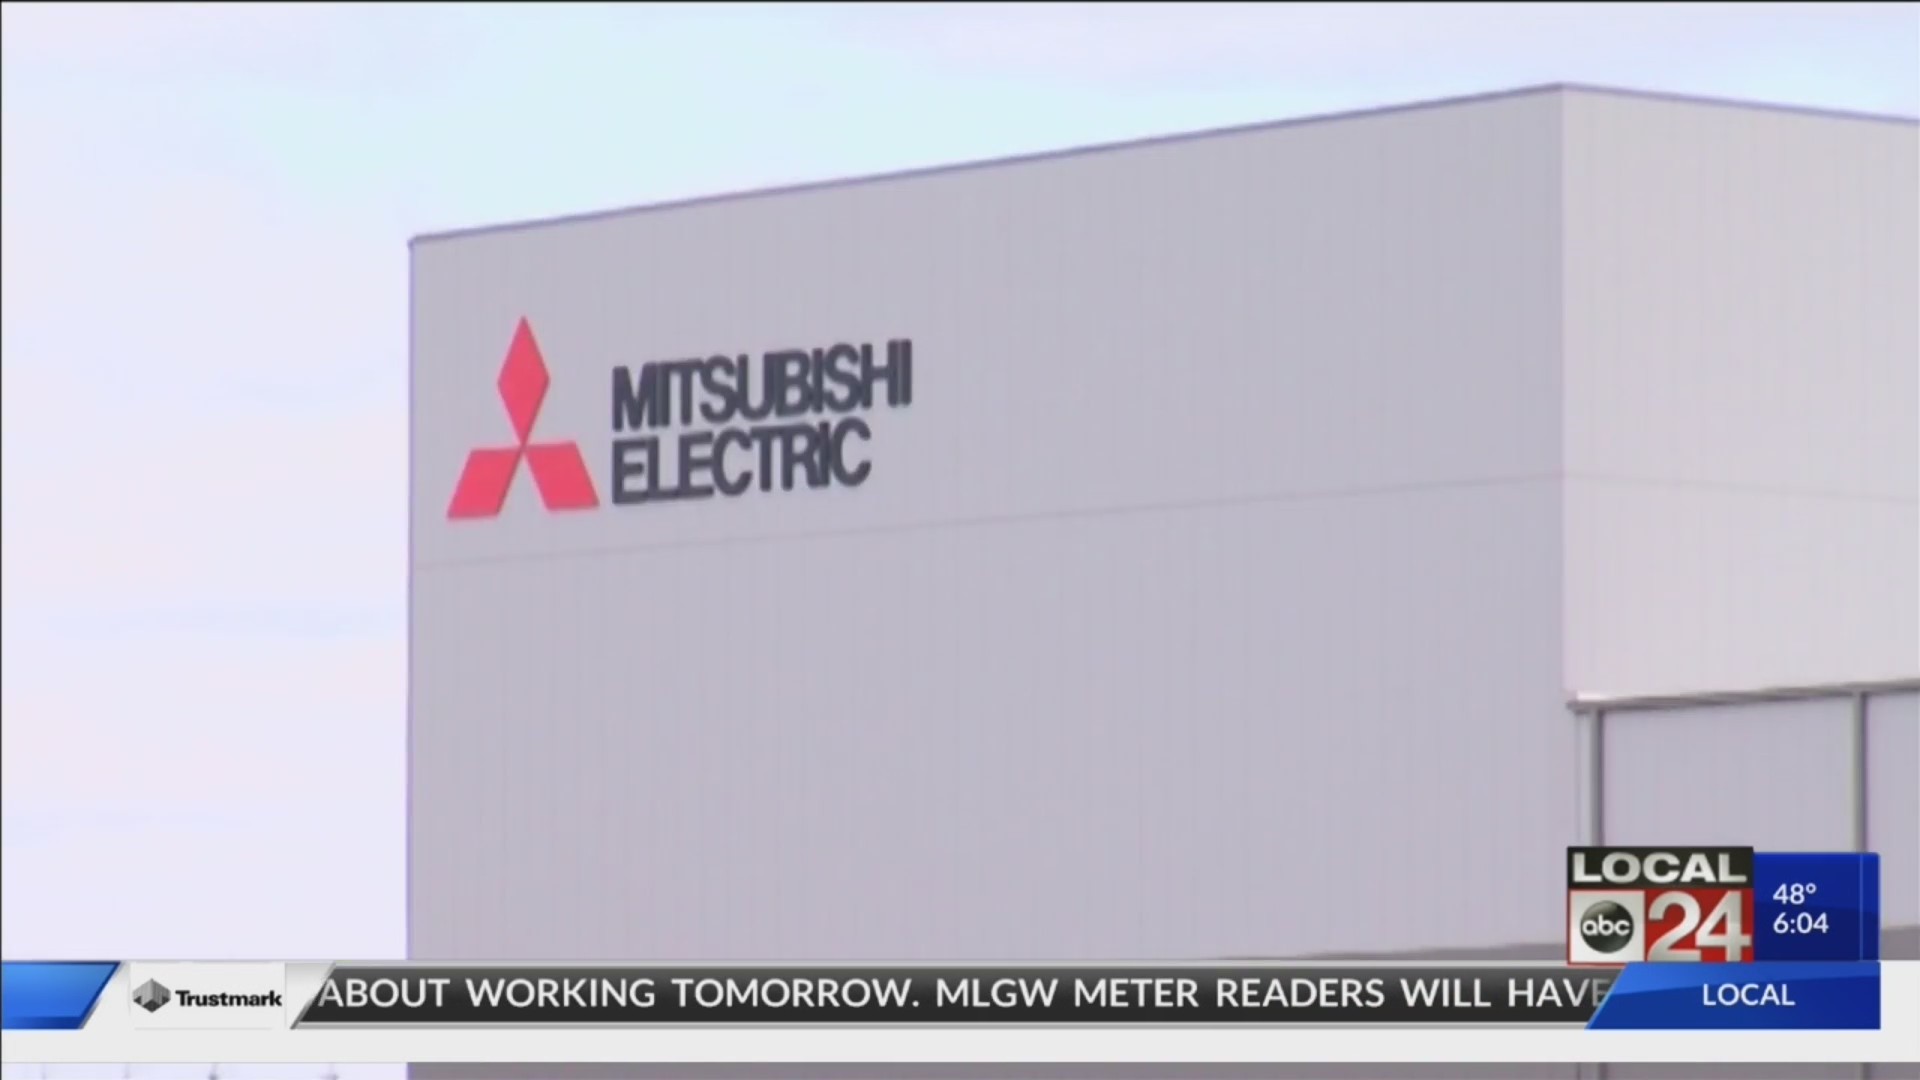 South Korean company announces plans to add more than 400 jobs in Memphis in coming years